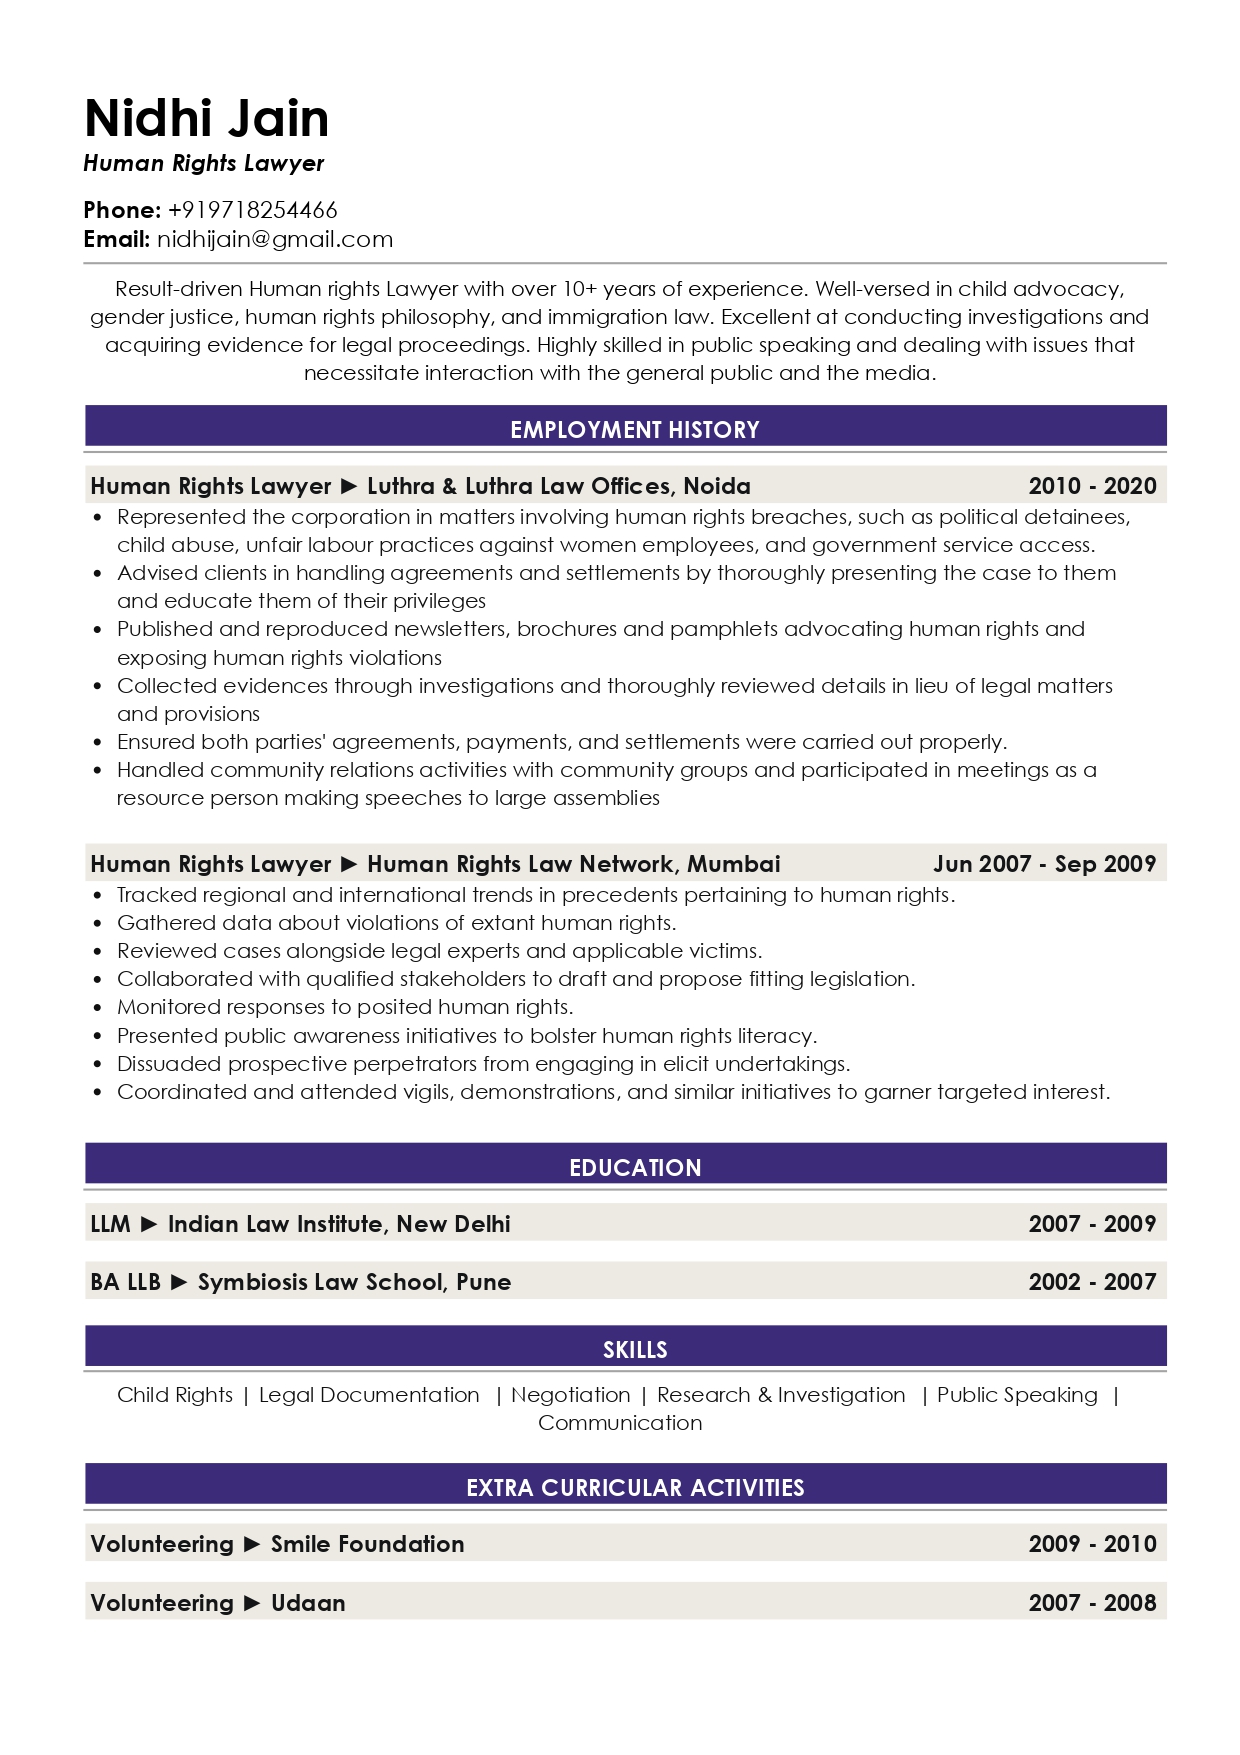 Sample Resume of Human Rights Lawyer | Free Resume Templates & Samples on Resumod.co